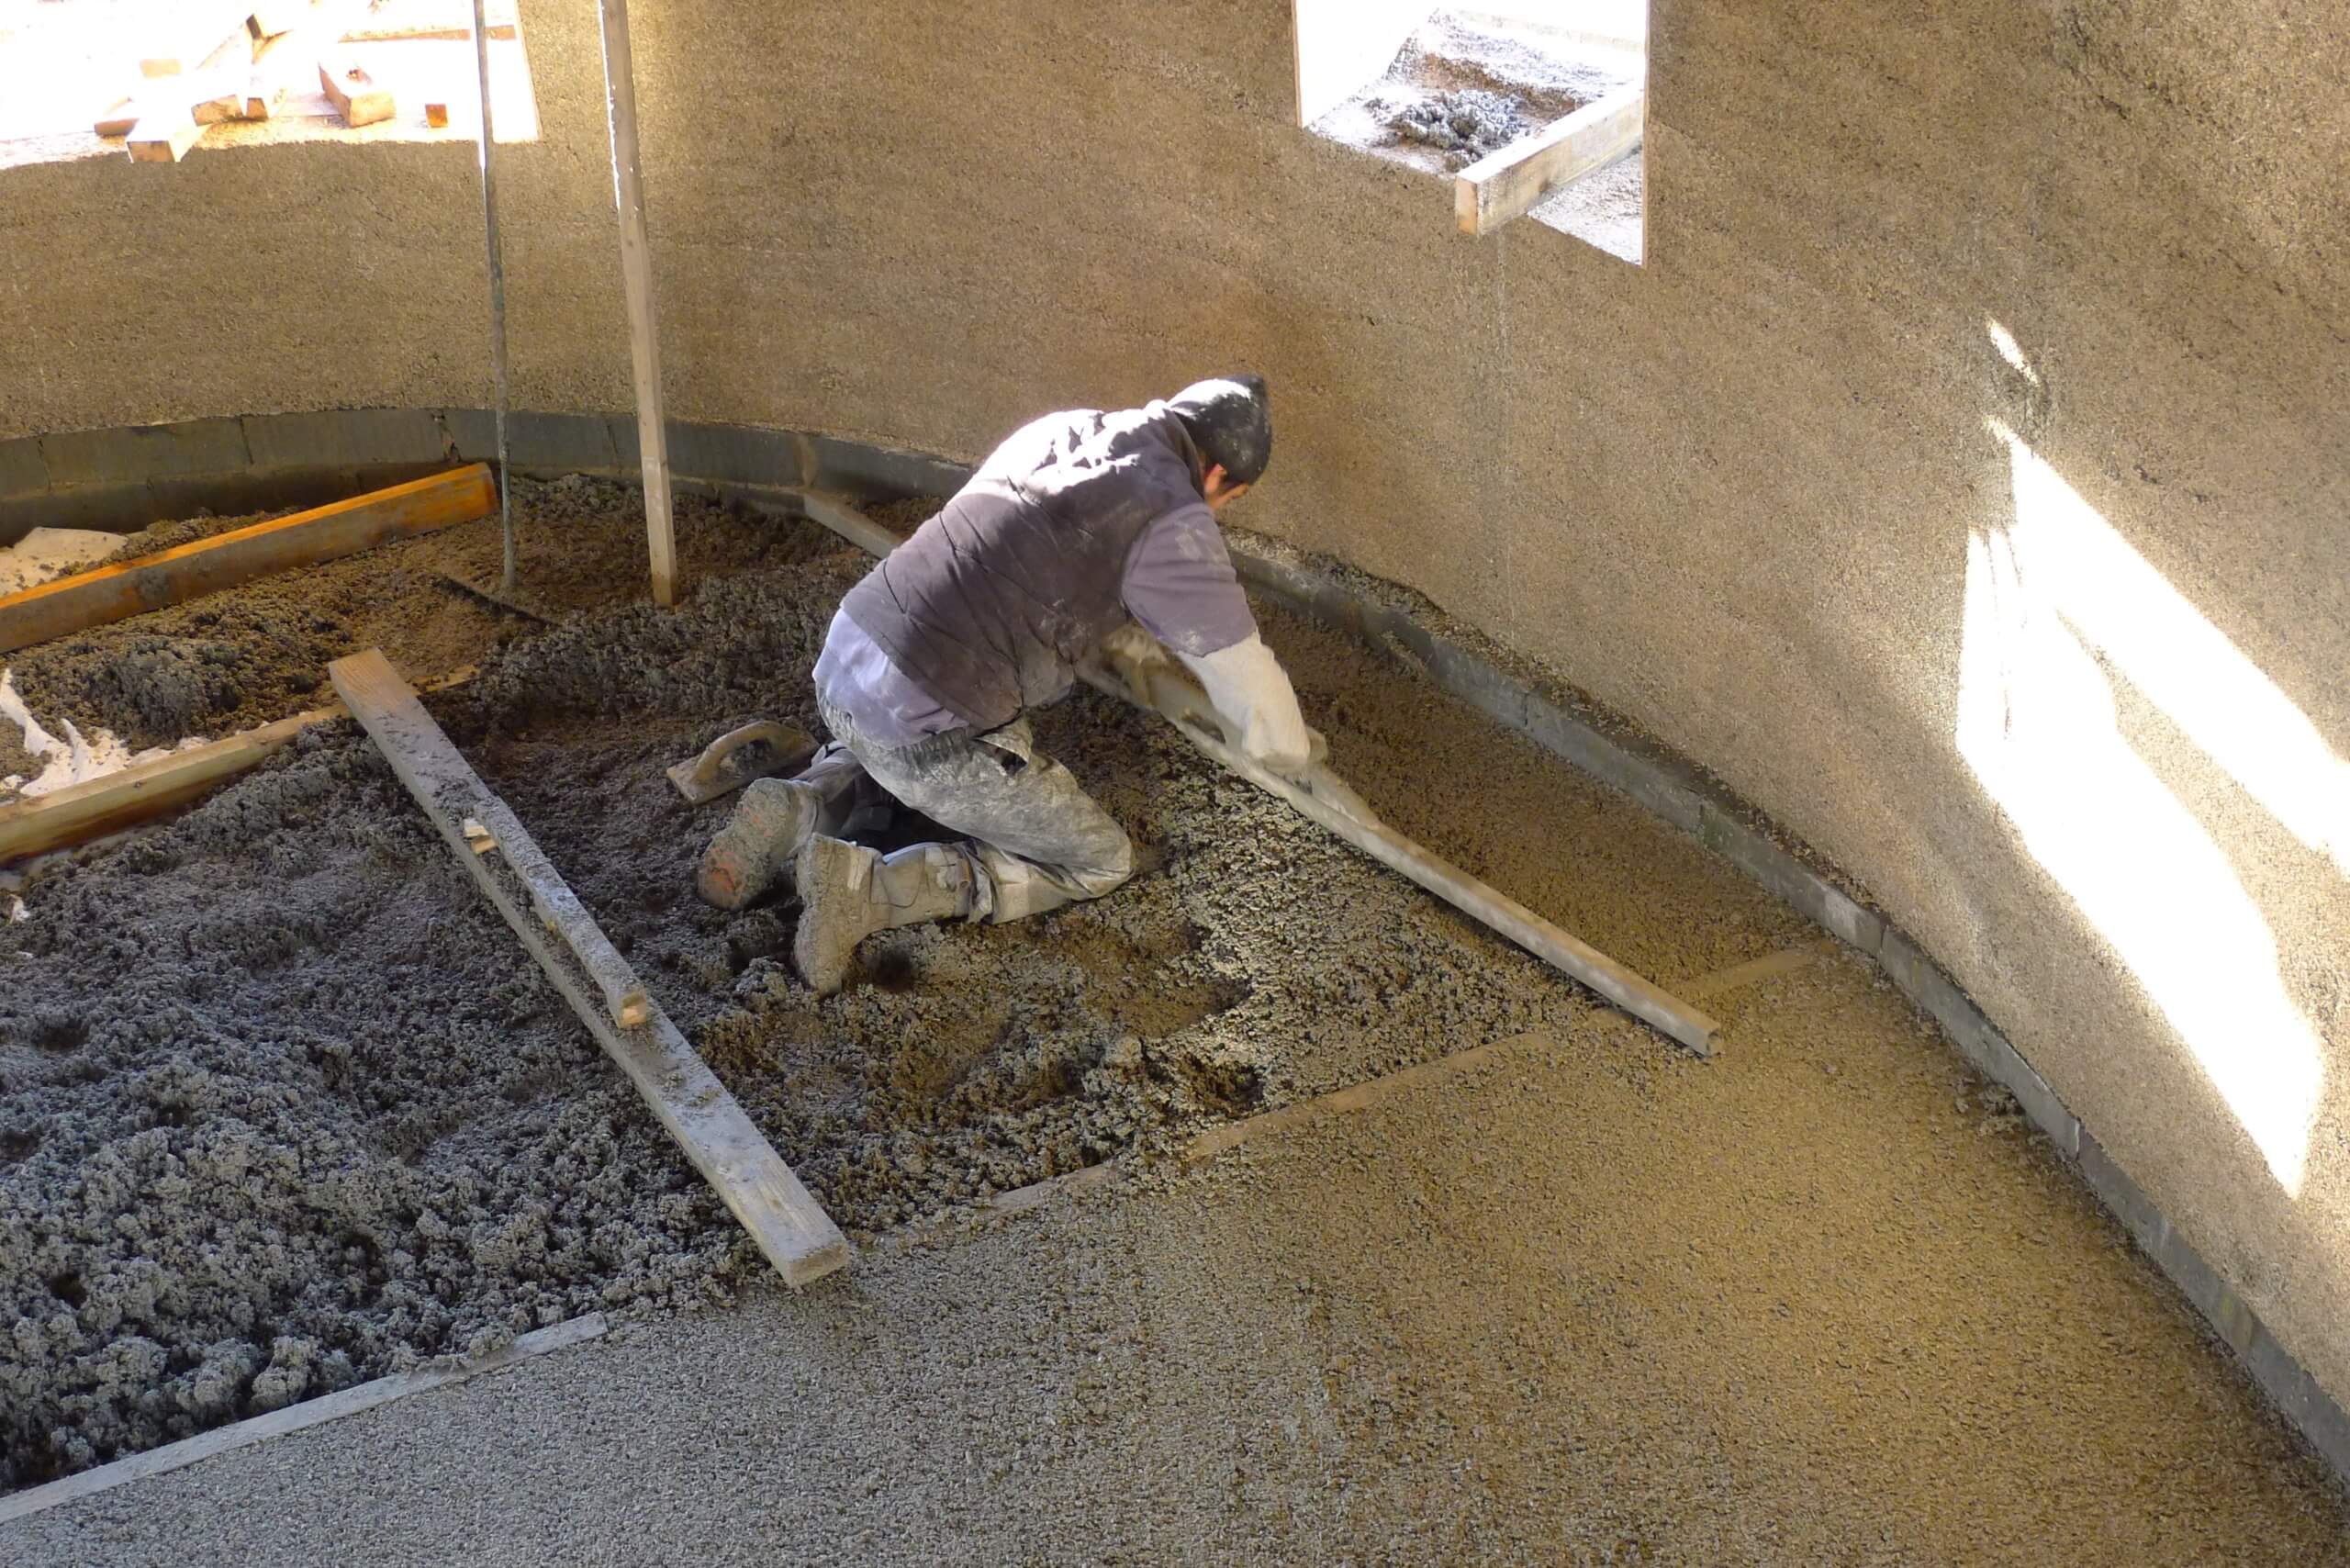 labourer levelling a lime-sand screed floor above hempcrete floor and surrounded by hempcrete walls